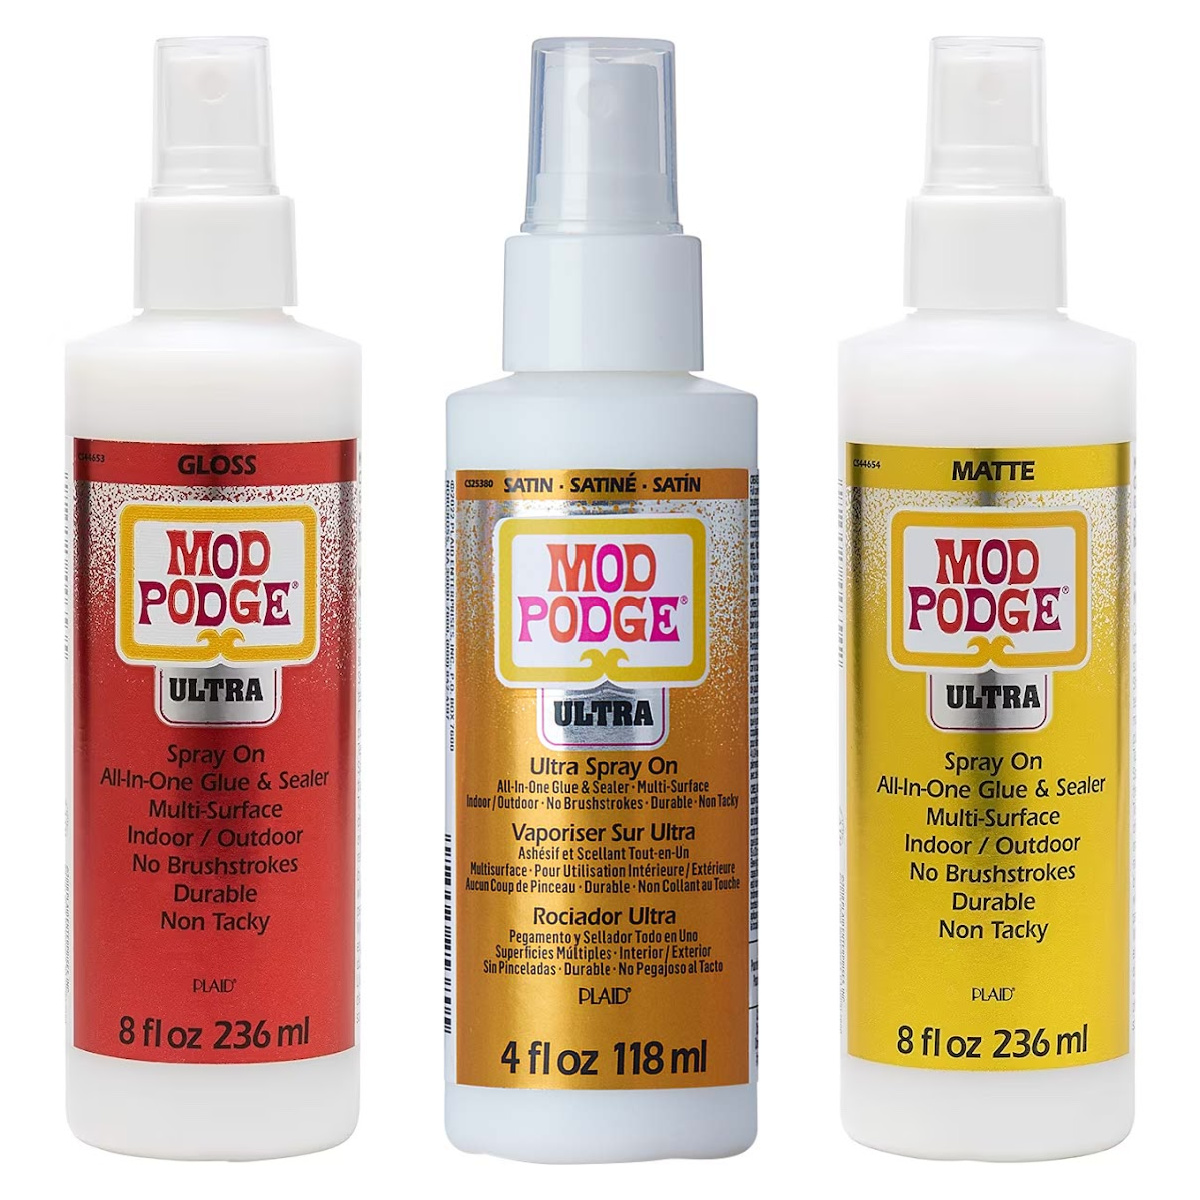 Anyone have any luck using this modge podge spray for sealing the